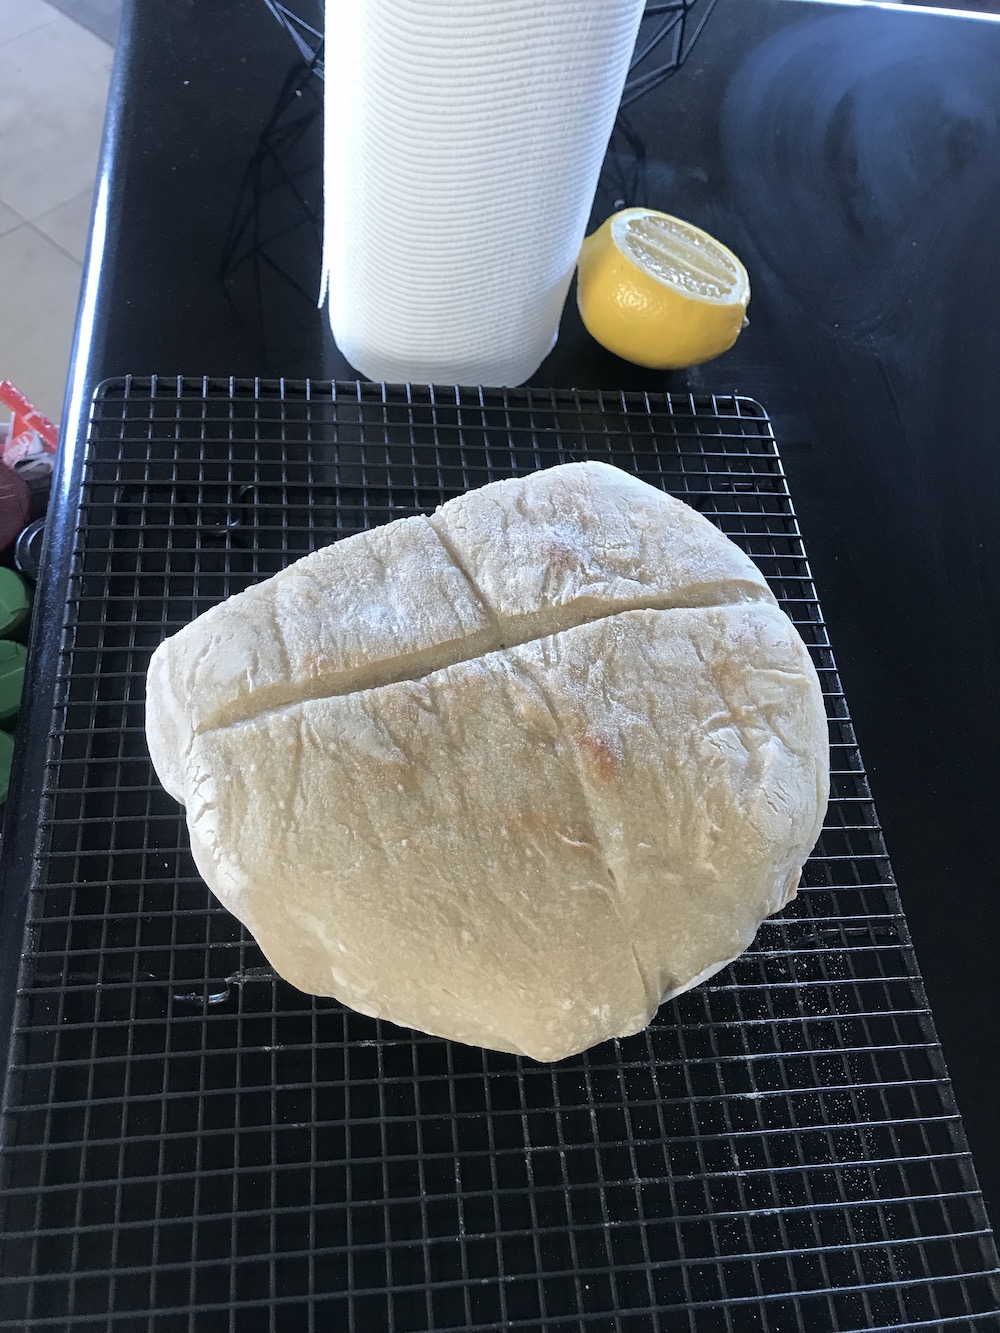 a flat pale loaf of bread, with a cut side facing the camera, you can see the tiny bubbles in it